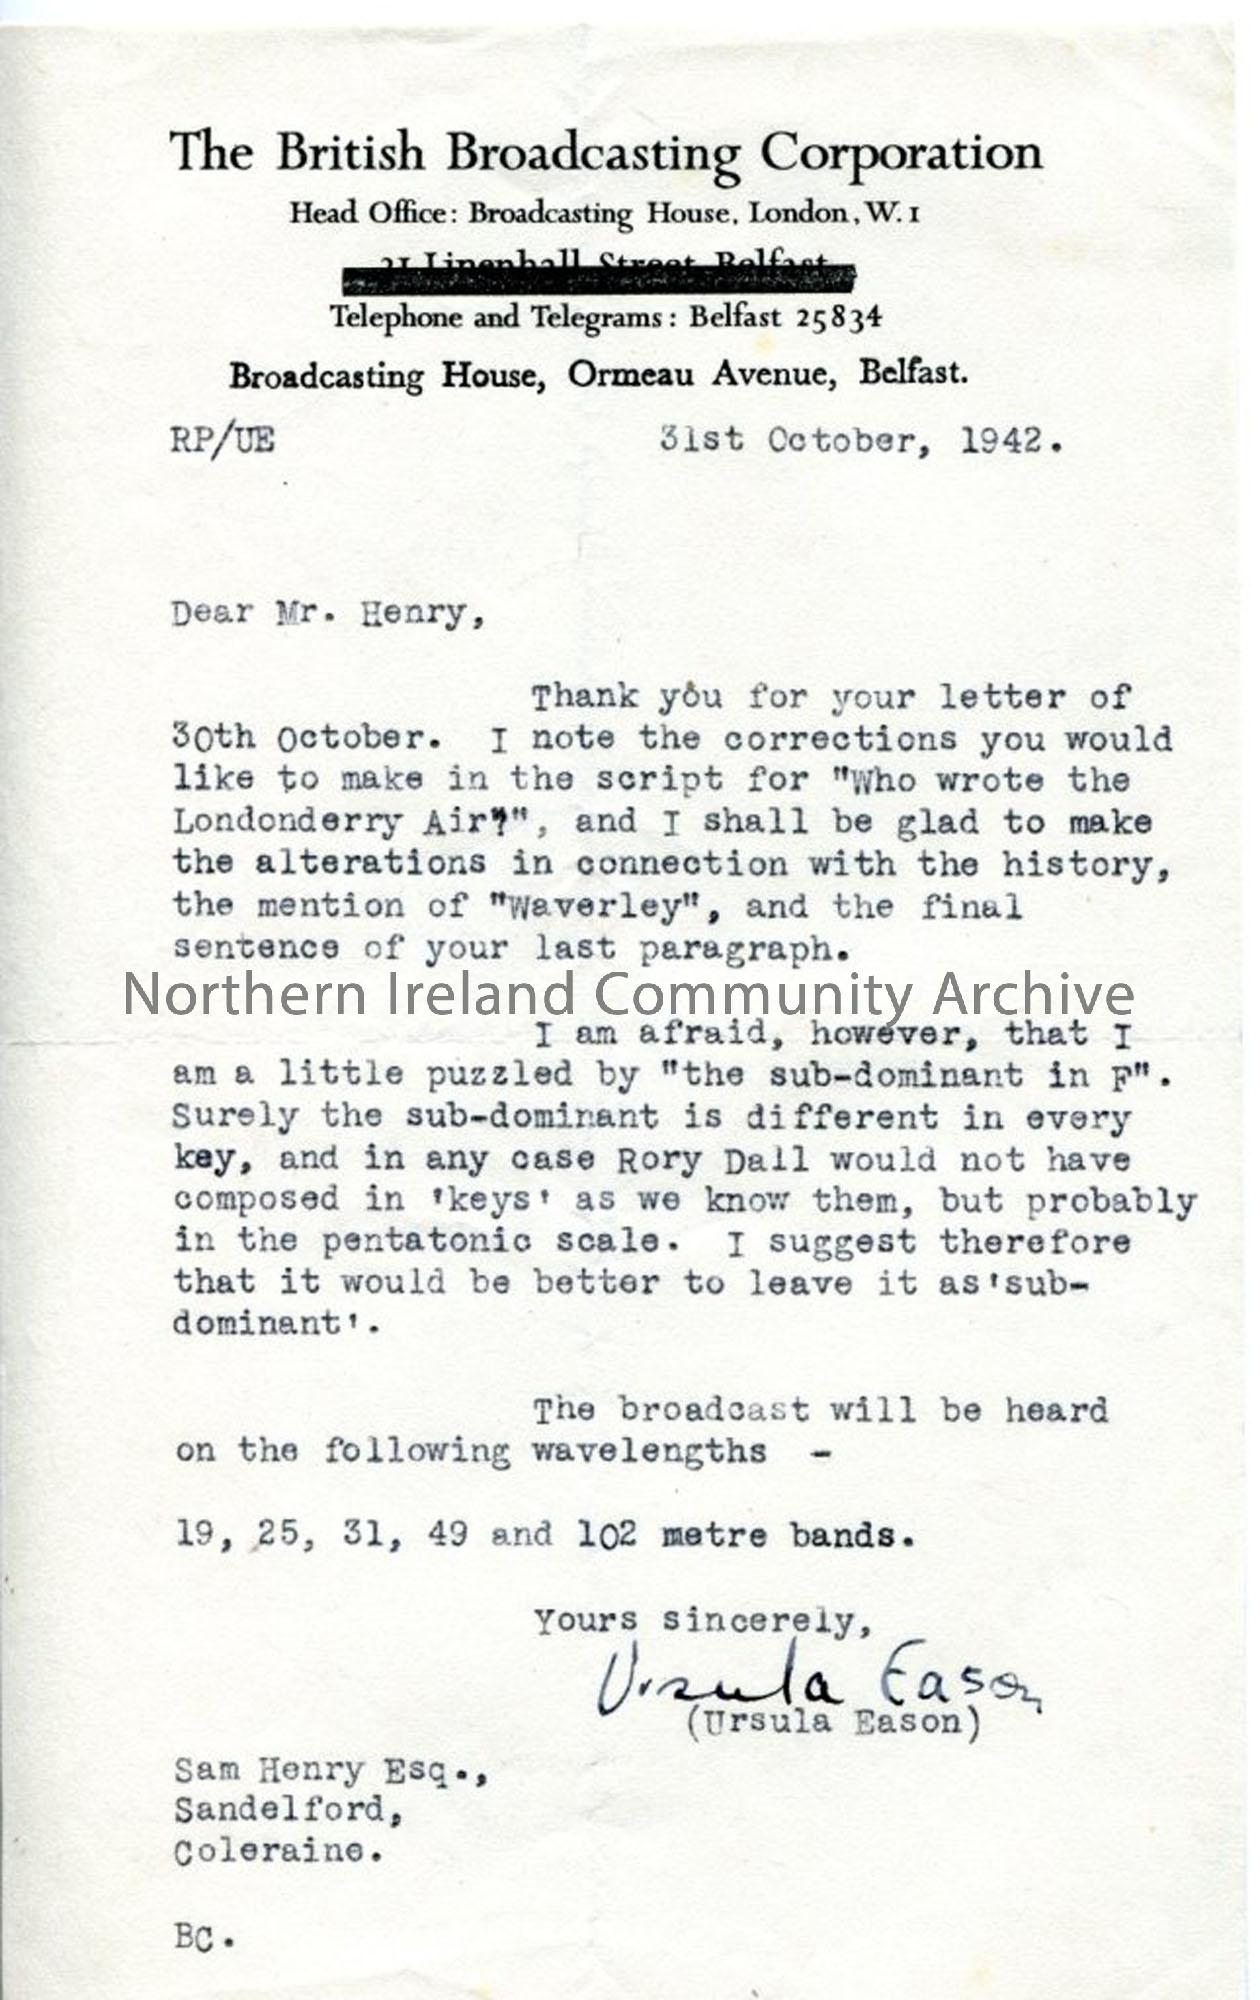 Letter from Ursula Eason of the BBC, 31.10.1942.